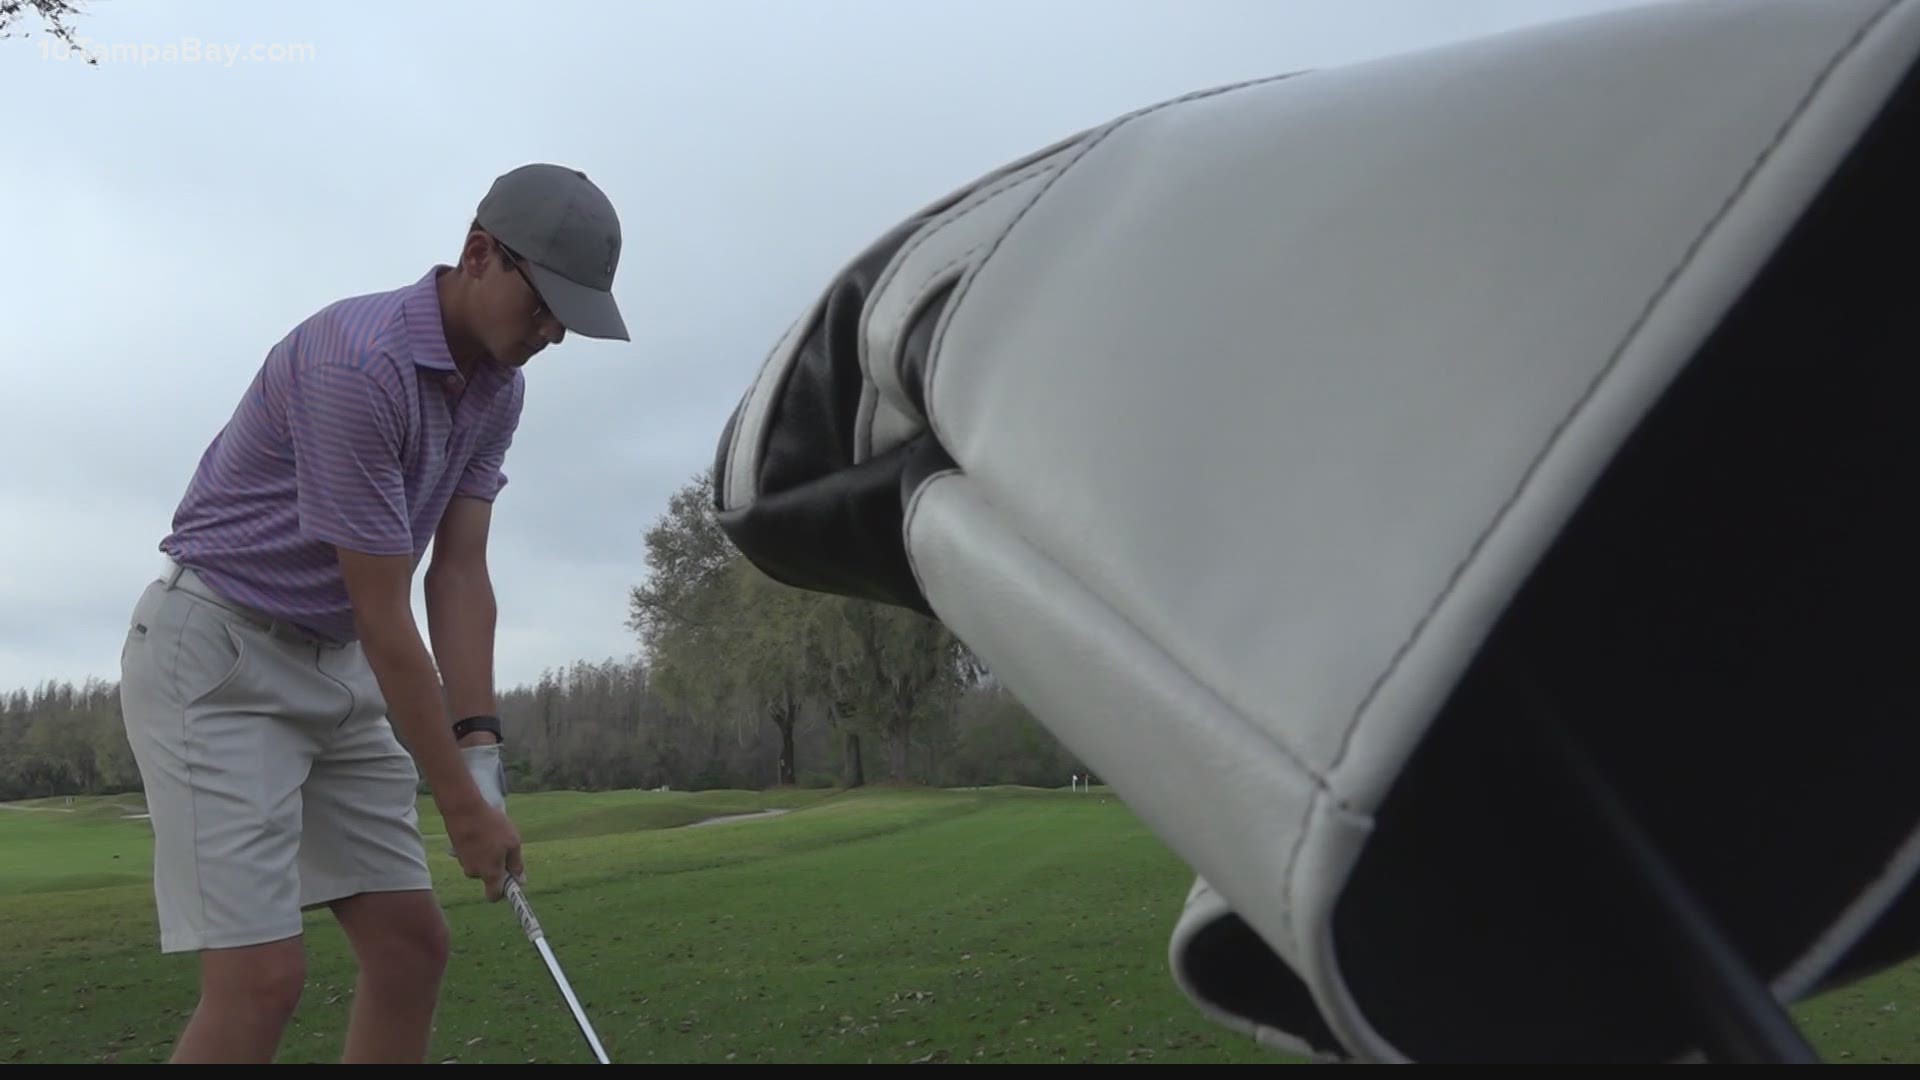 In August 2020, Braden Cecil was diagnosed with Stage 4 renal failure, just three days before tryouts for the golf team. He made the team and helped it finish 13-0.